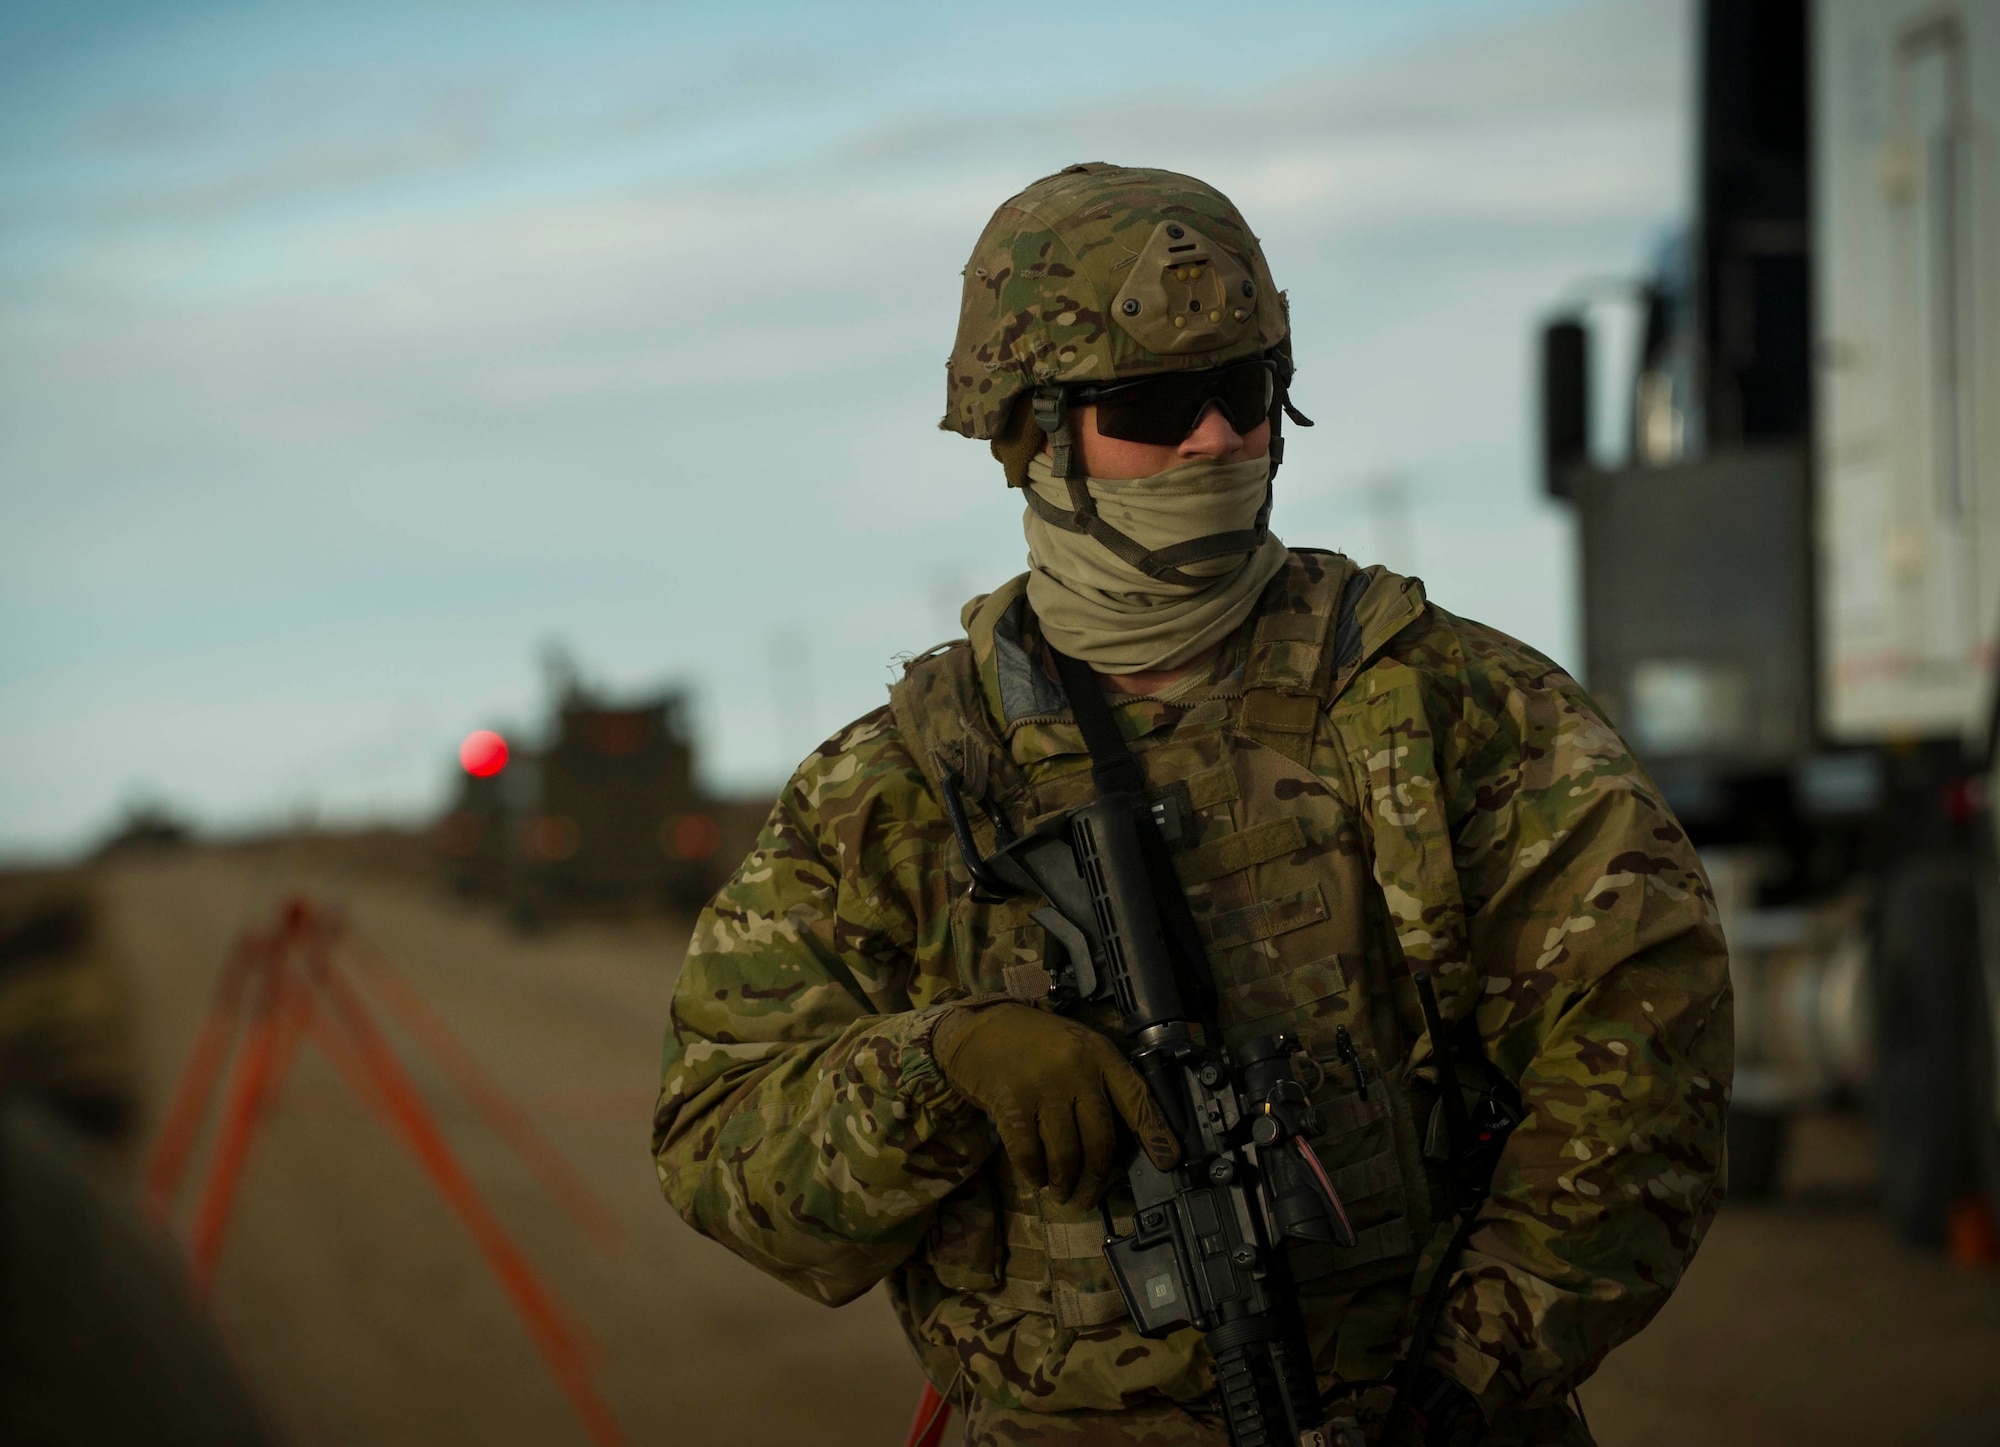 Senior Airman Dustin Silc, 791st Missile Security Forces Squadron convoy response force member, listens to directions from his team-lead during a recapture and recovery exercise at the missile complex, N.D., Nov. 16, 2016. During the simulated scenario, Silc secured and recovered an asset that was taken over by hostile forces. (U.S. Air Force photo/Senior Airman Apryl Hall)